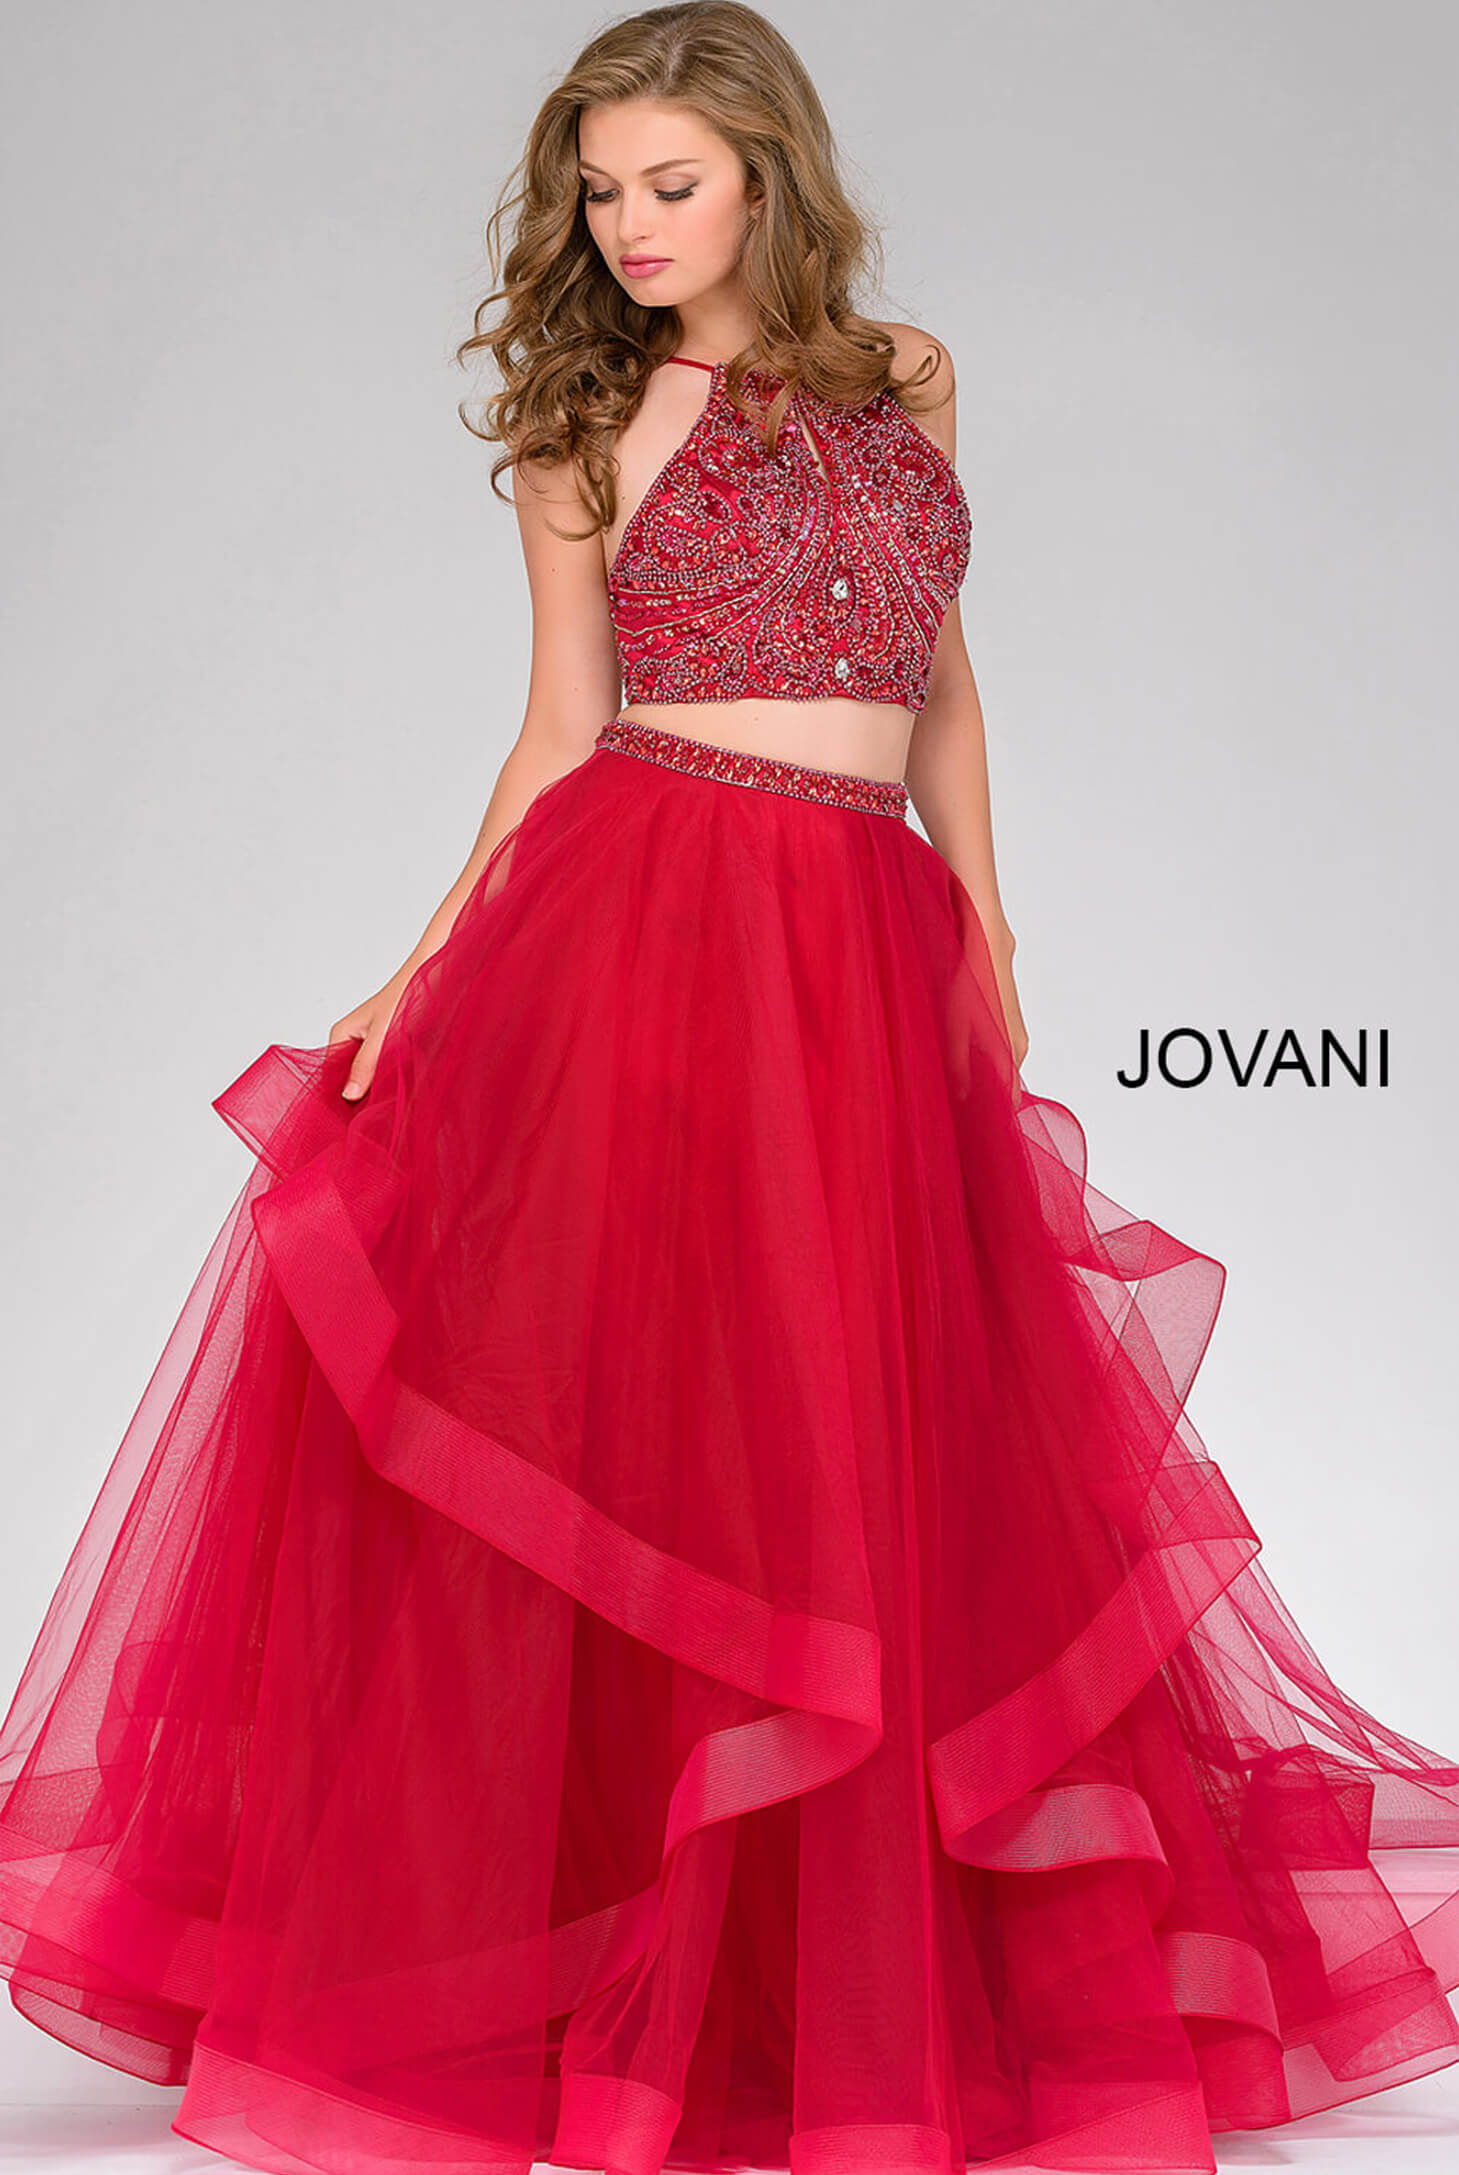 Top Red Prom Dresses for the Season 2018